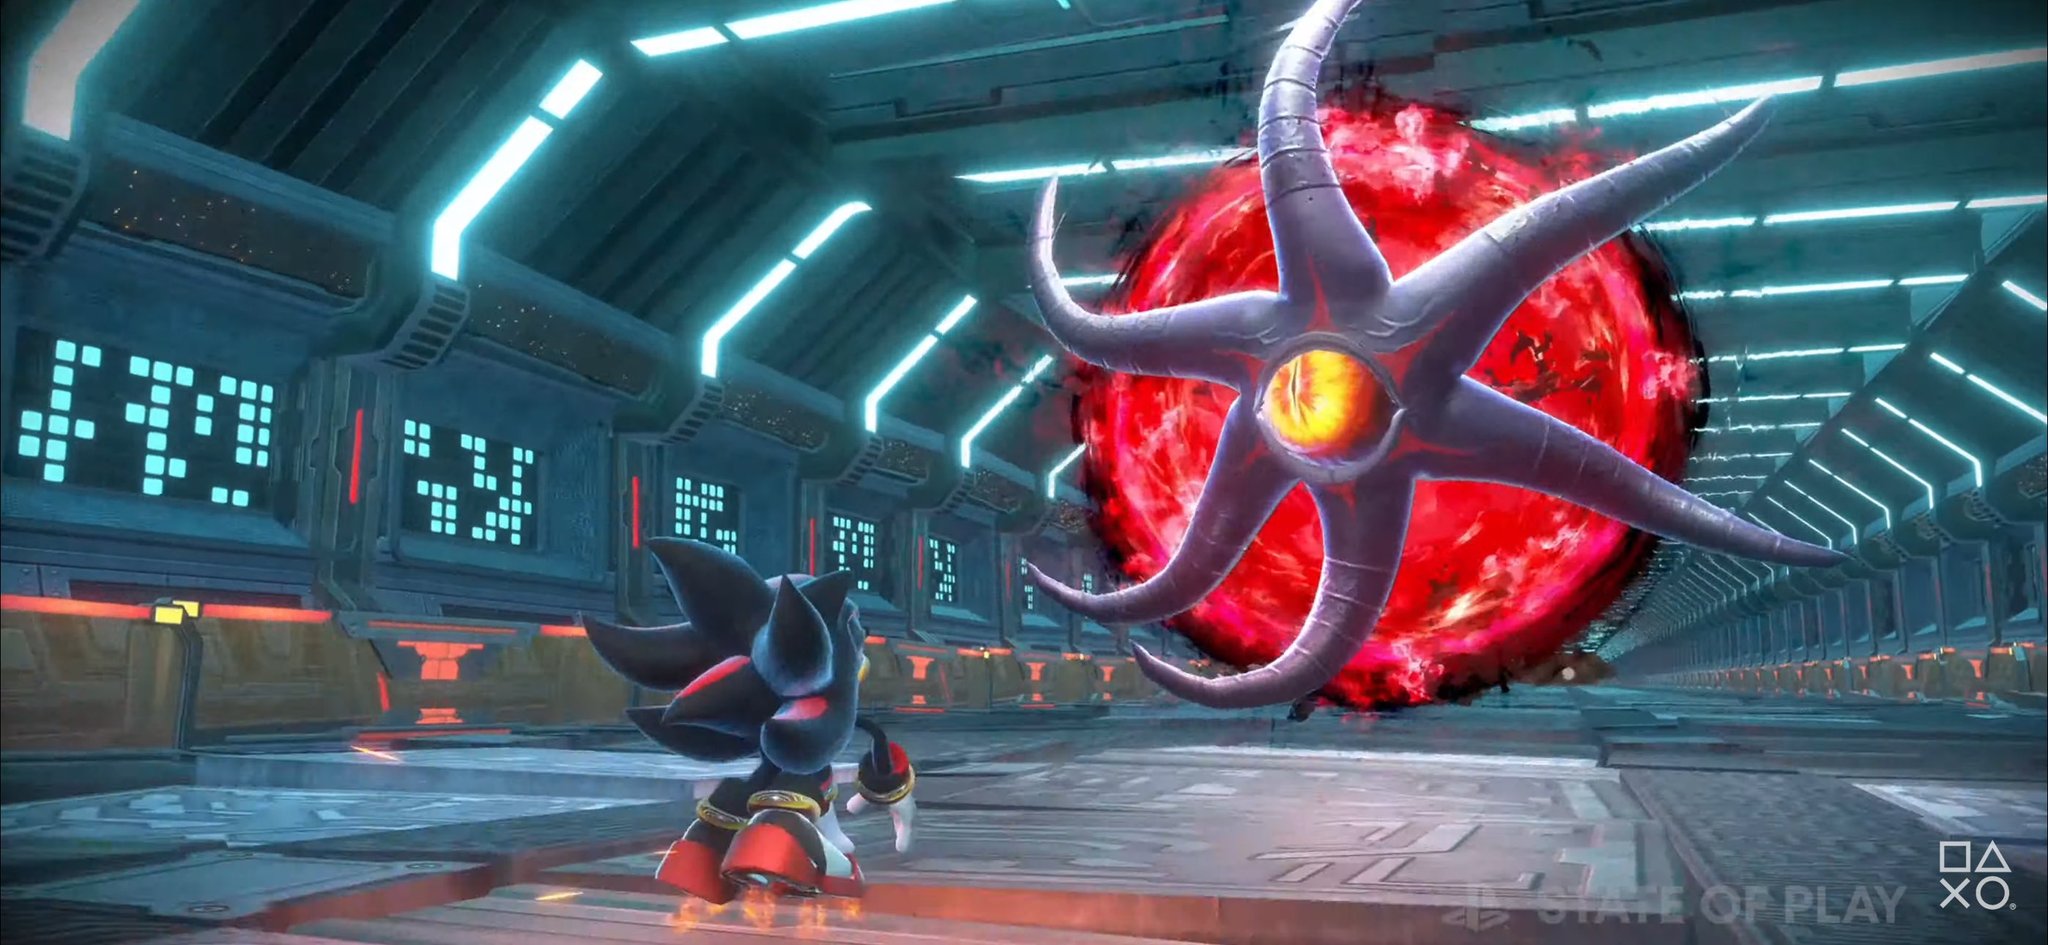 Sonic X Shadow Generations coming to PlayStation this fall